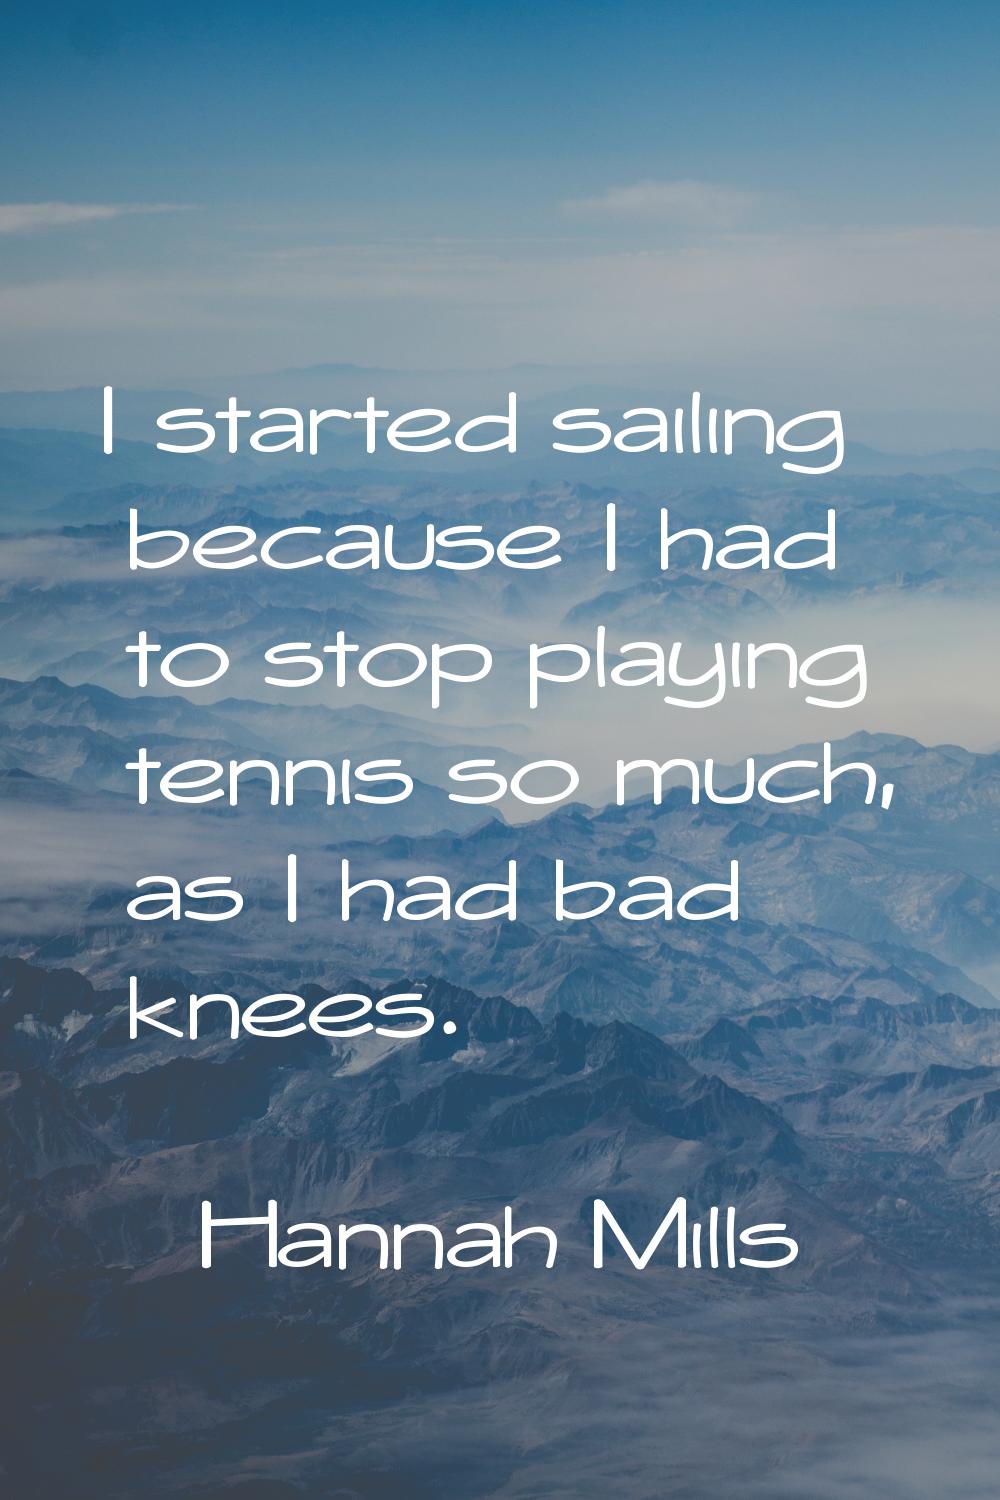 I started sailing because I had to stop playing tennis so much, as I had bad knees.